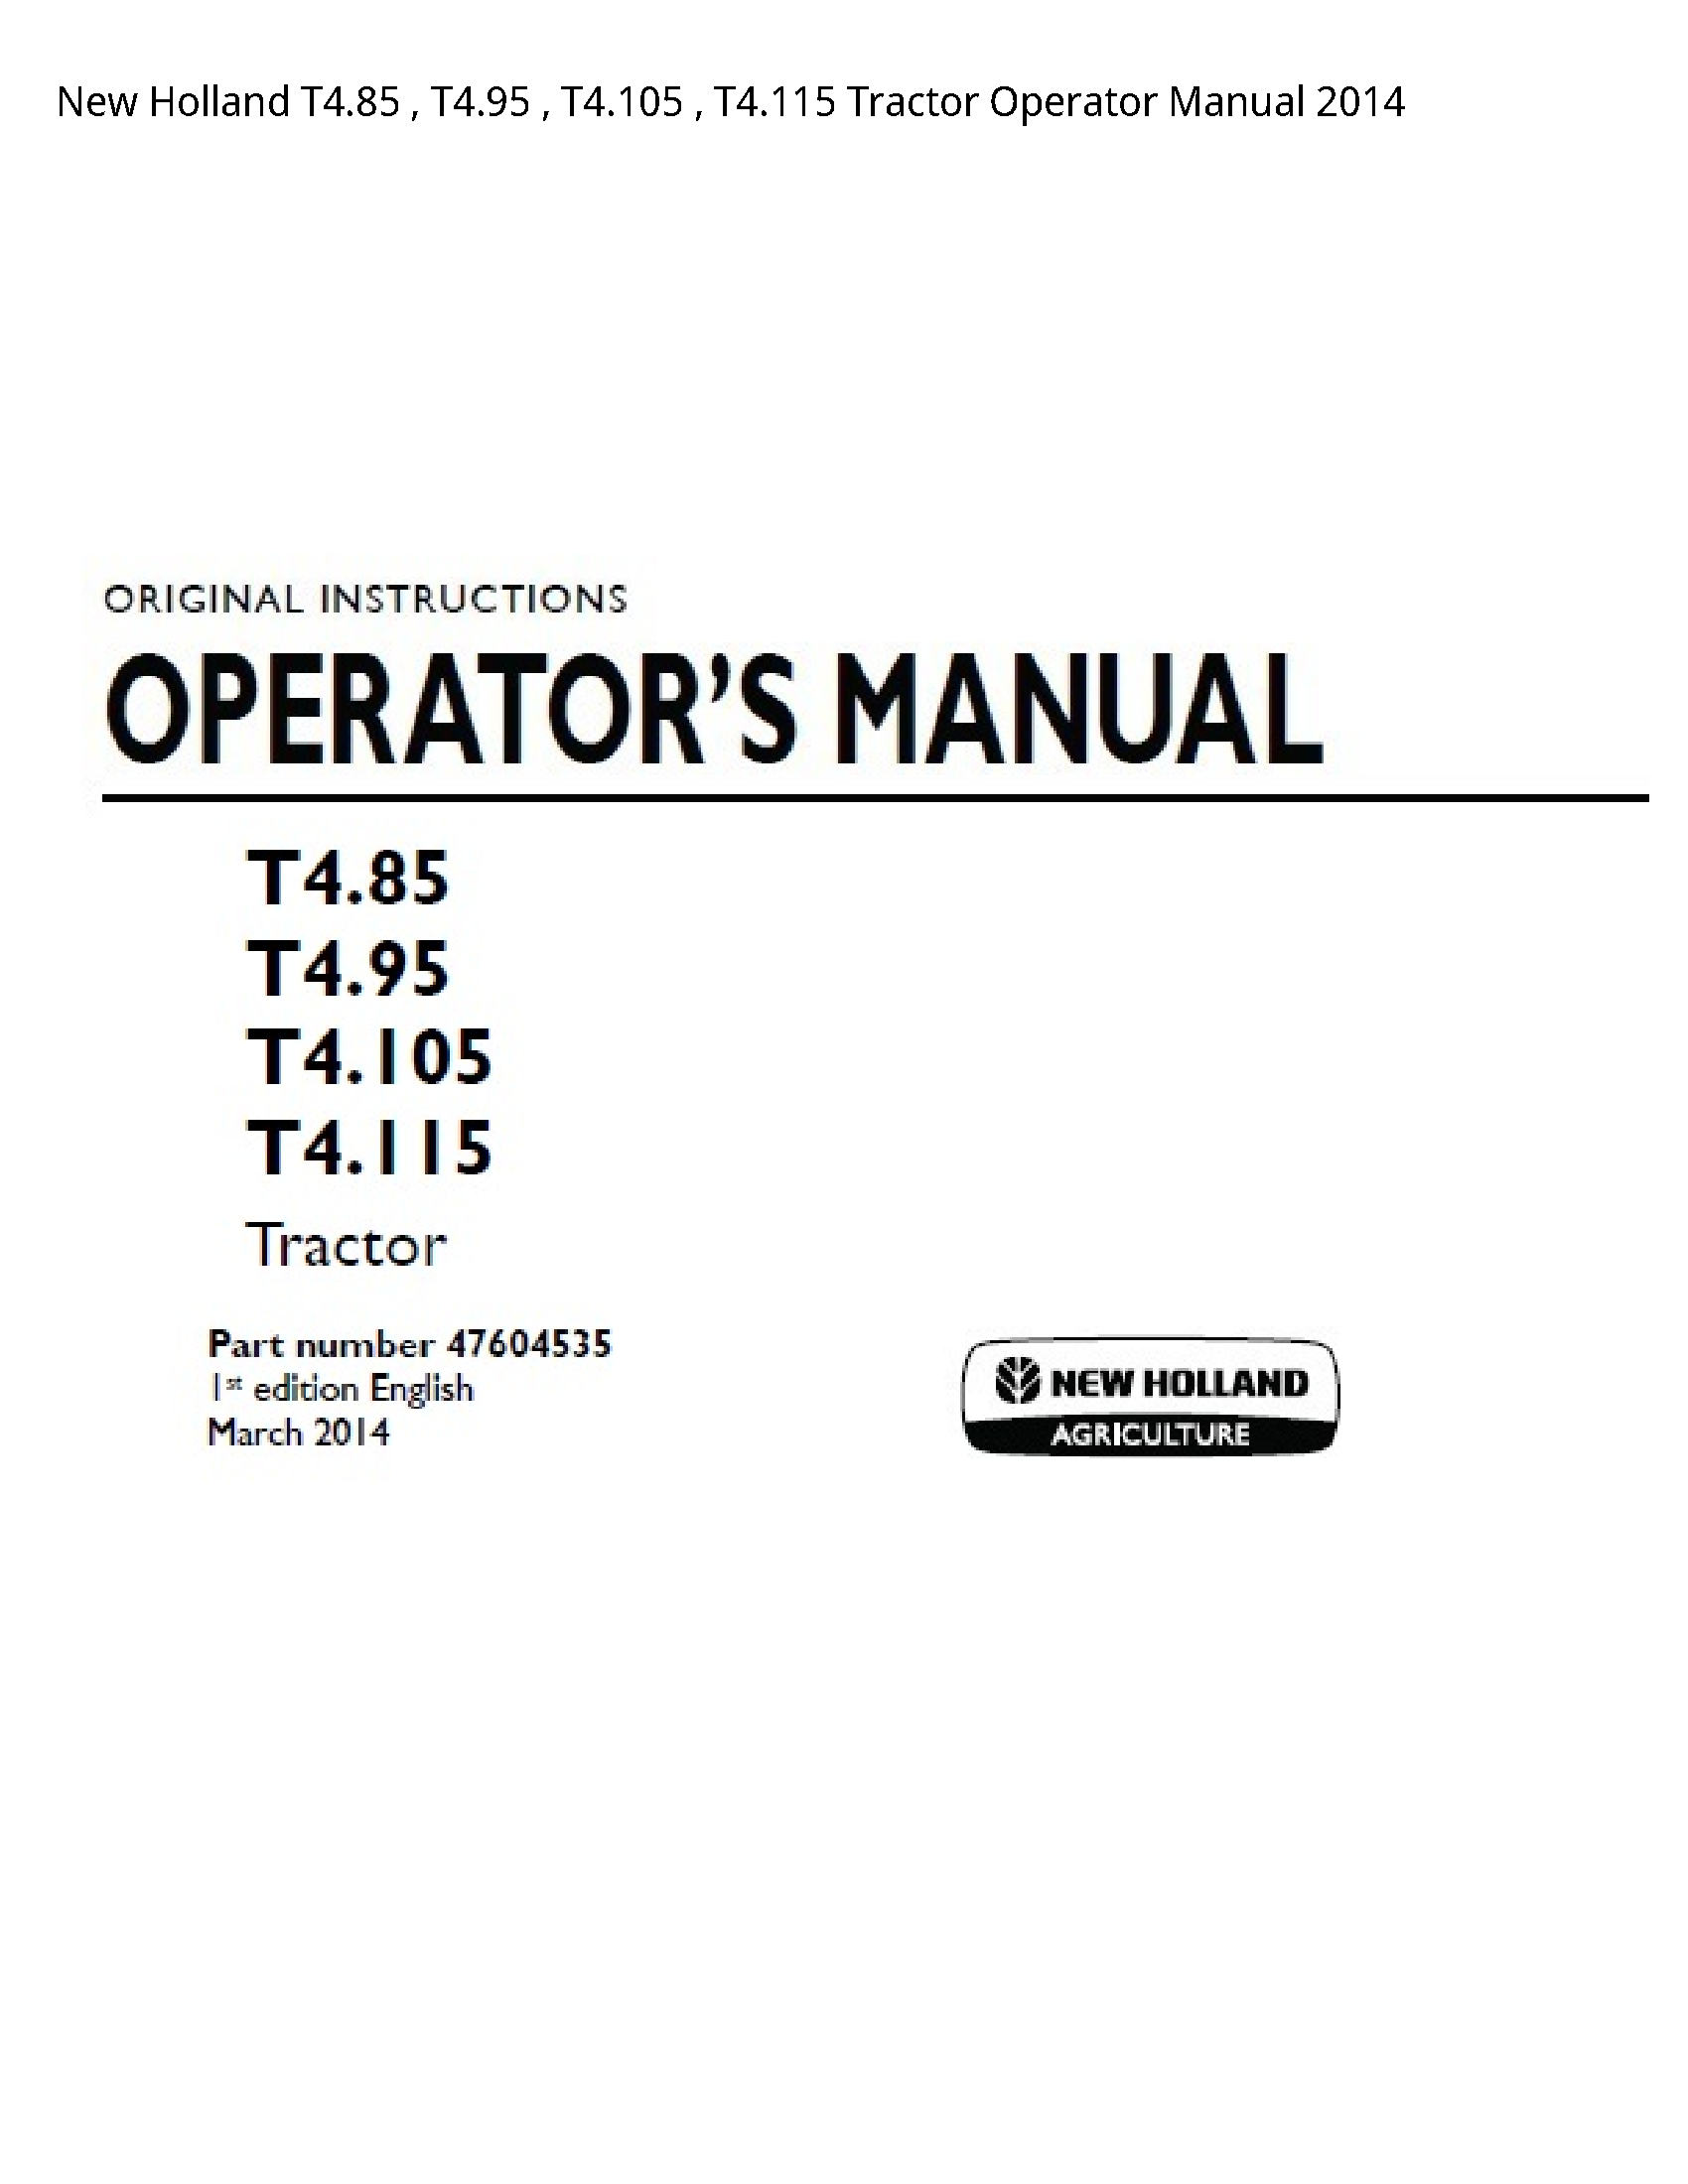 New Holland T4.85 Tractor Operator manual